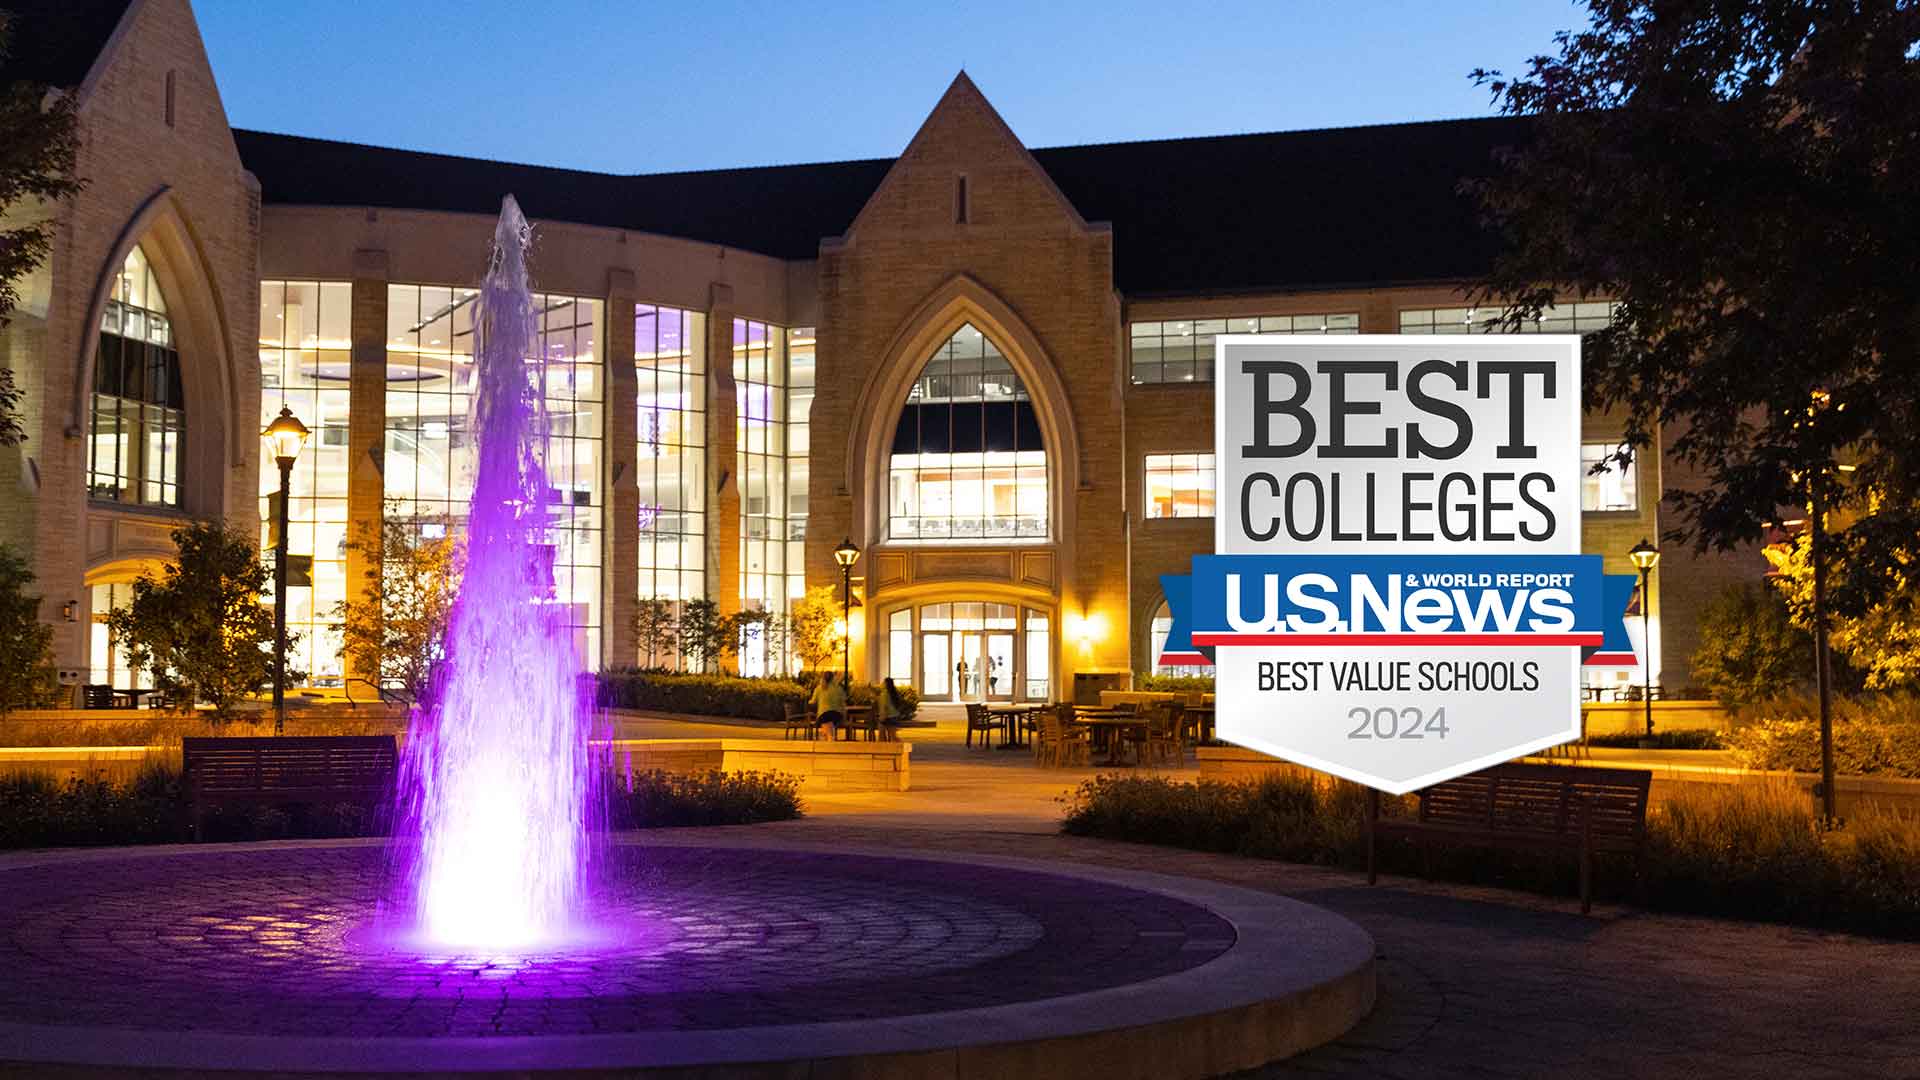 Image of campus with an award for being named a best value school by the US News and World Report